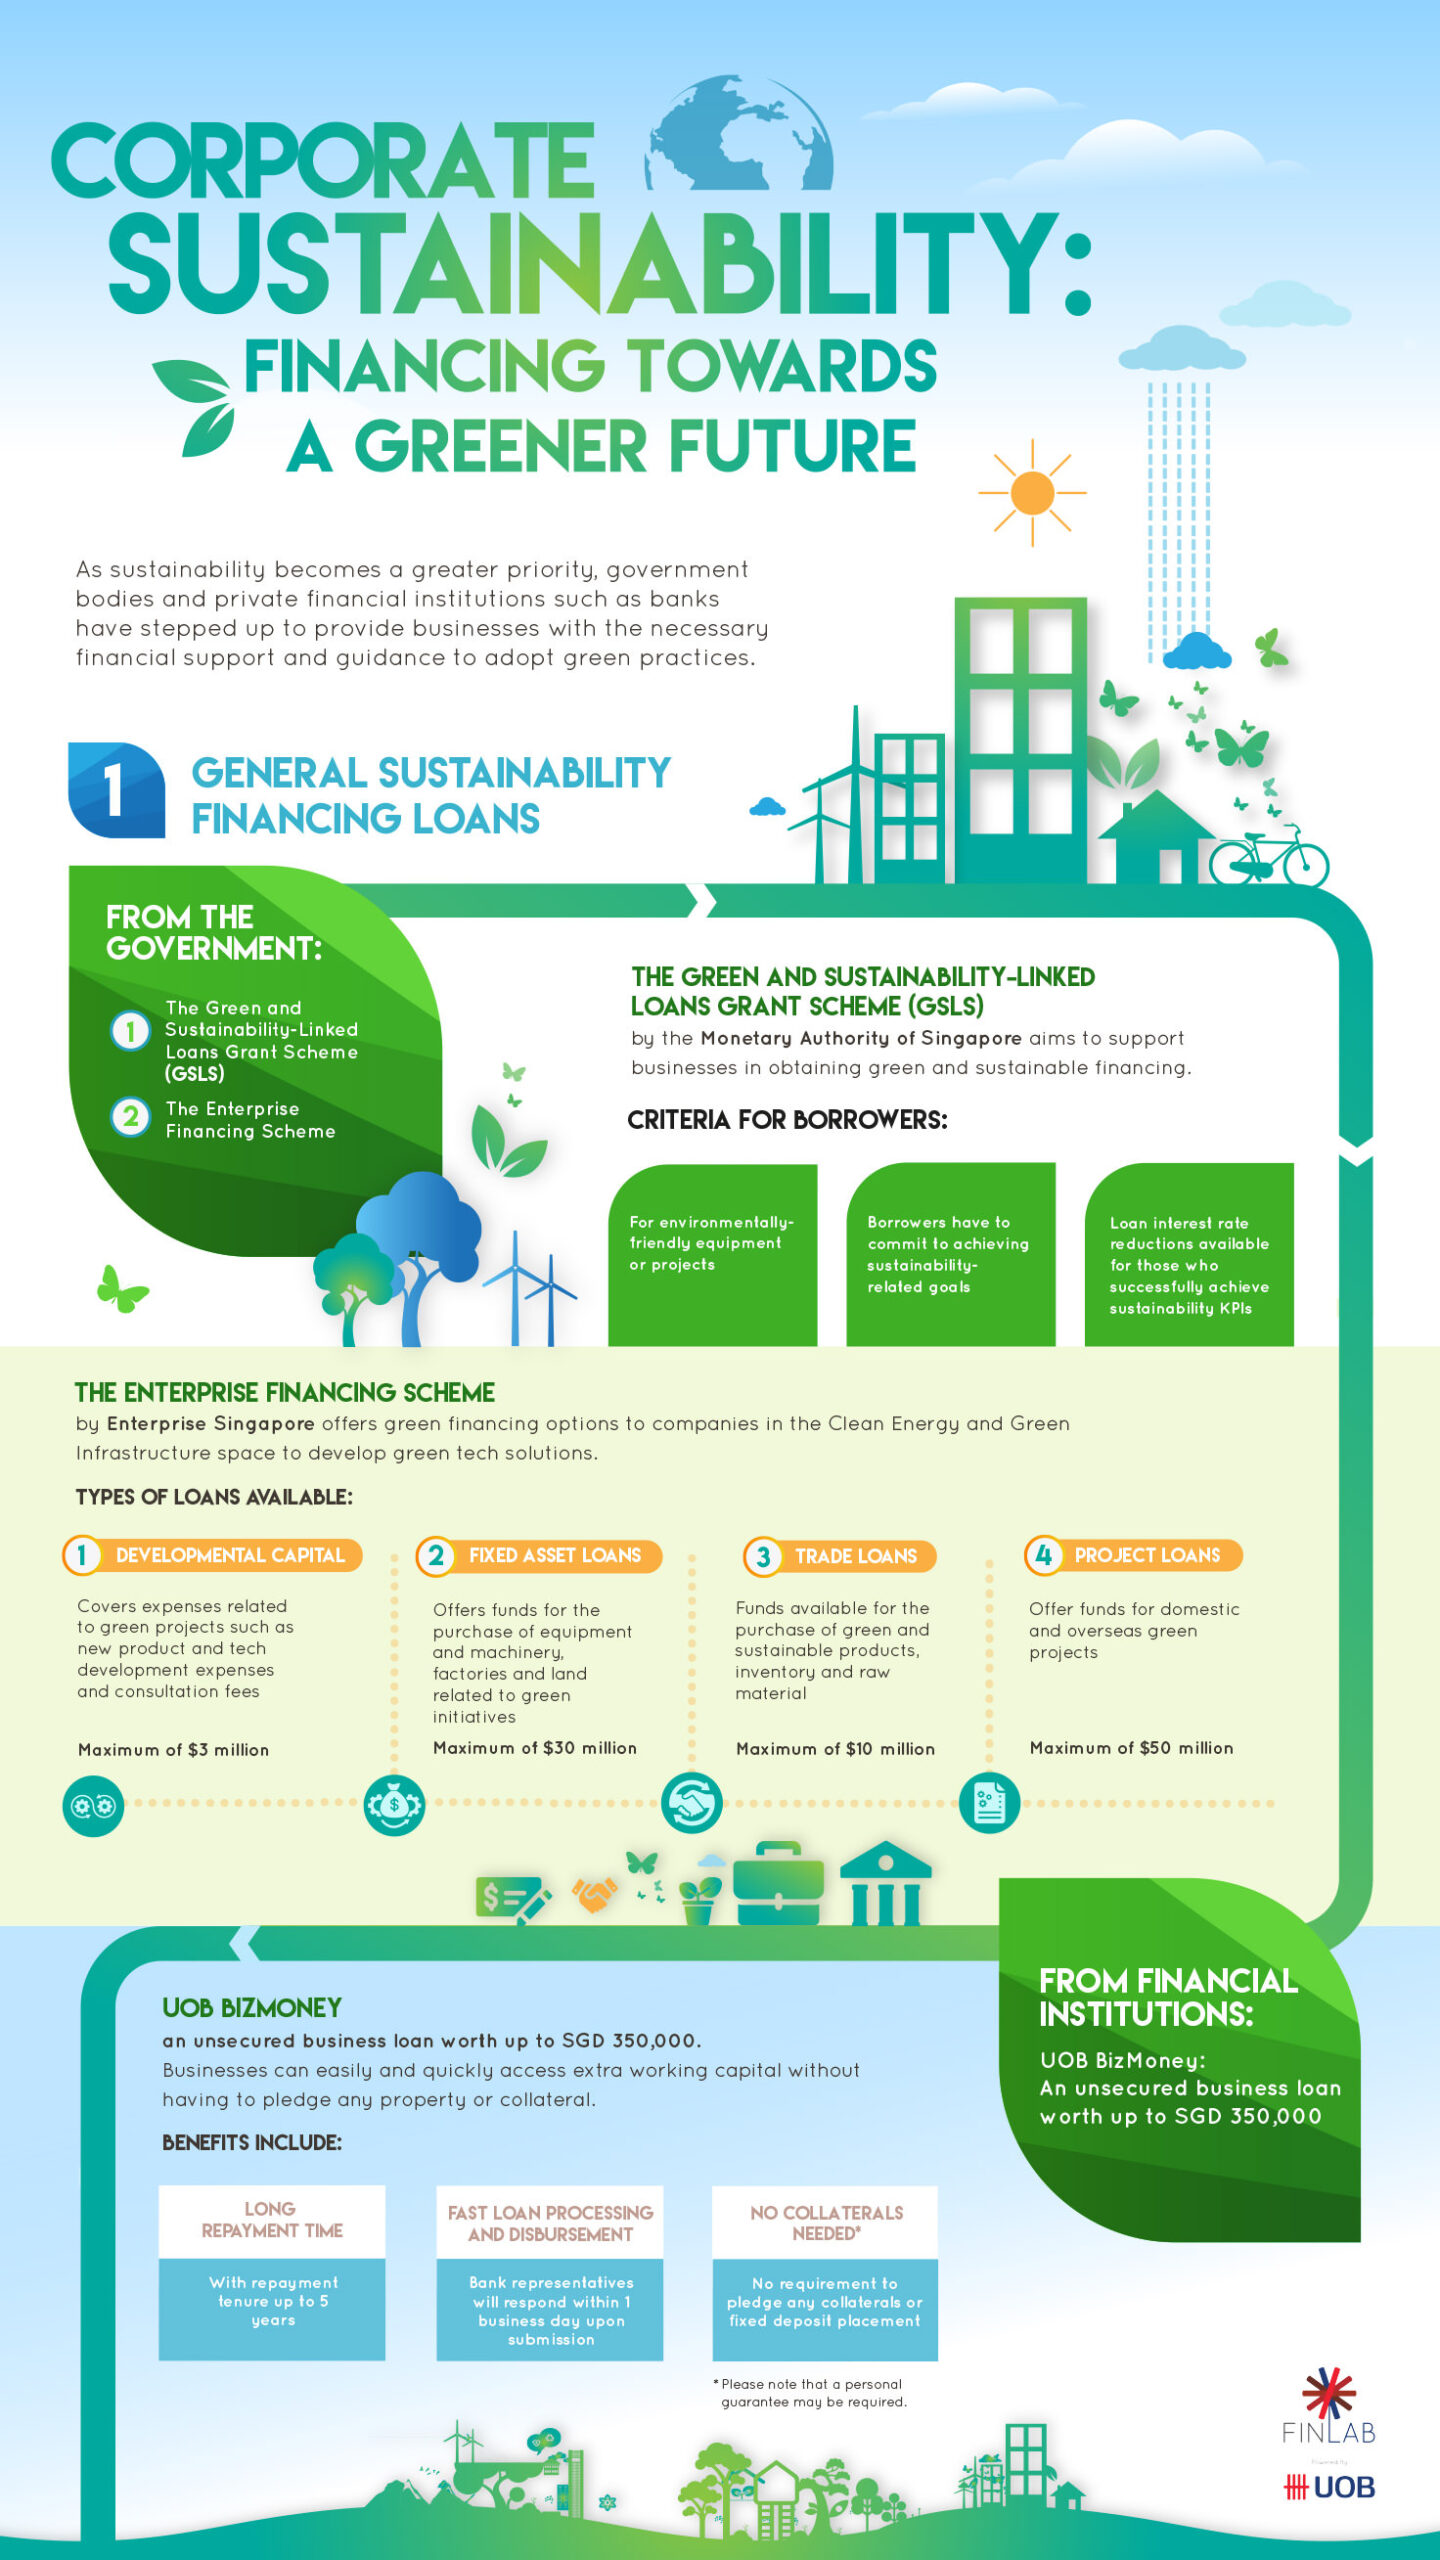 Corporate Sustainability Financing Towards A Greener Future 1 Scaled - Corporate Sustainability: Financing Towards A Greener Future